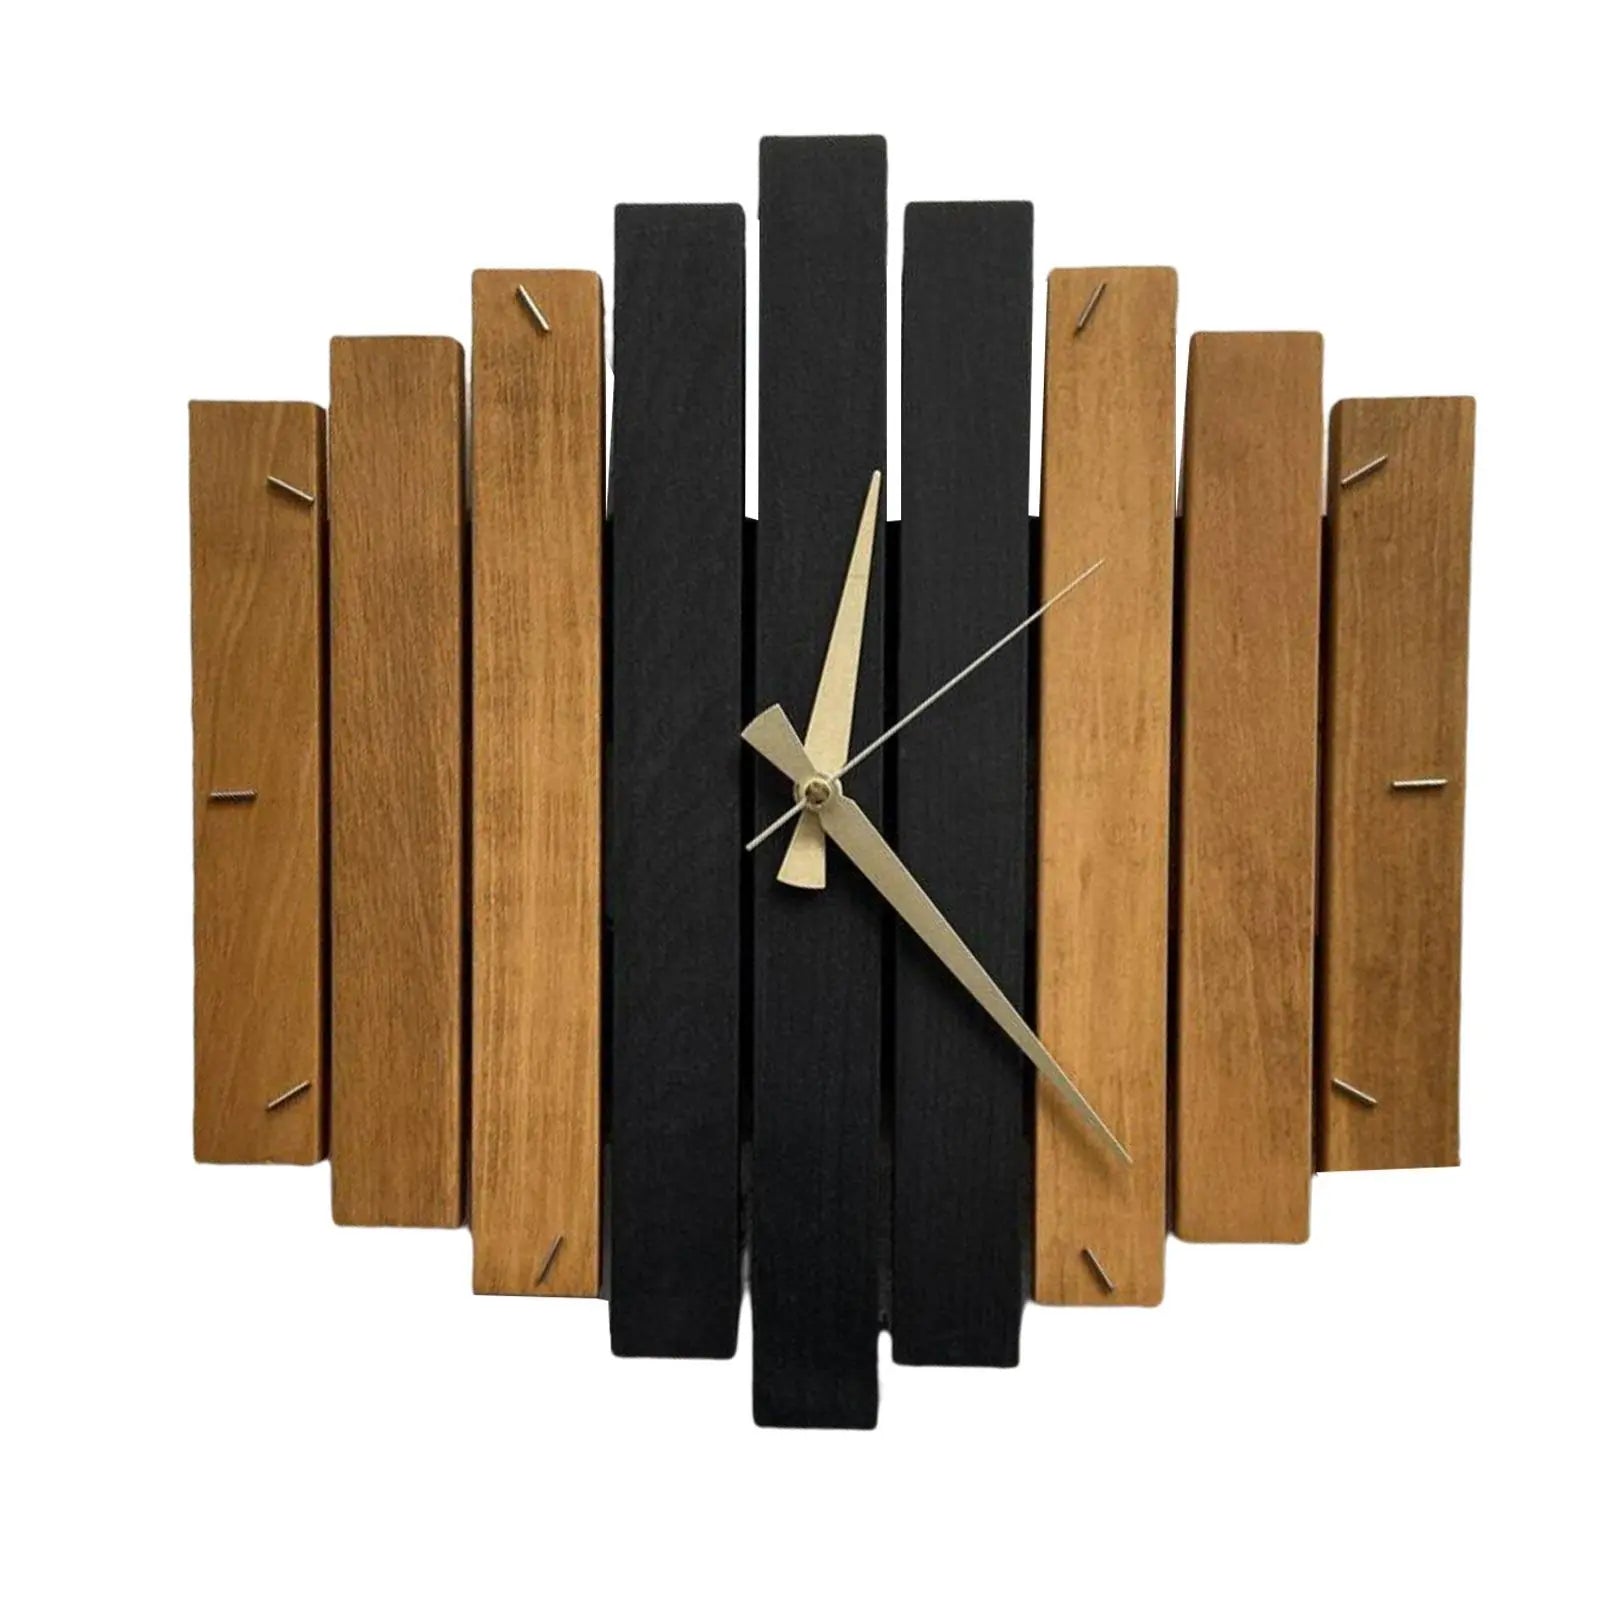 12inch Modern Wooden Wall Clock DIY Pointer Quartz Silent Hanging Steampunk for Office Hotel Home Living Room Decors